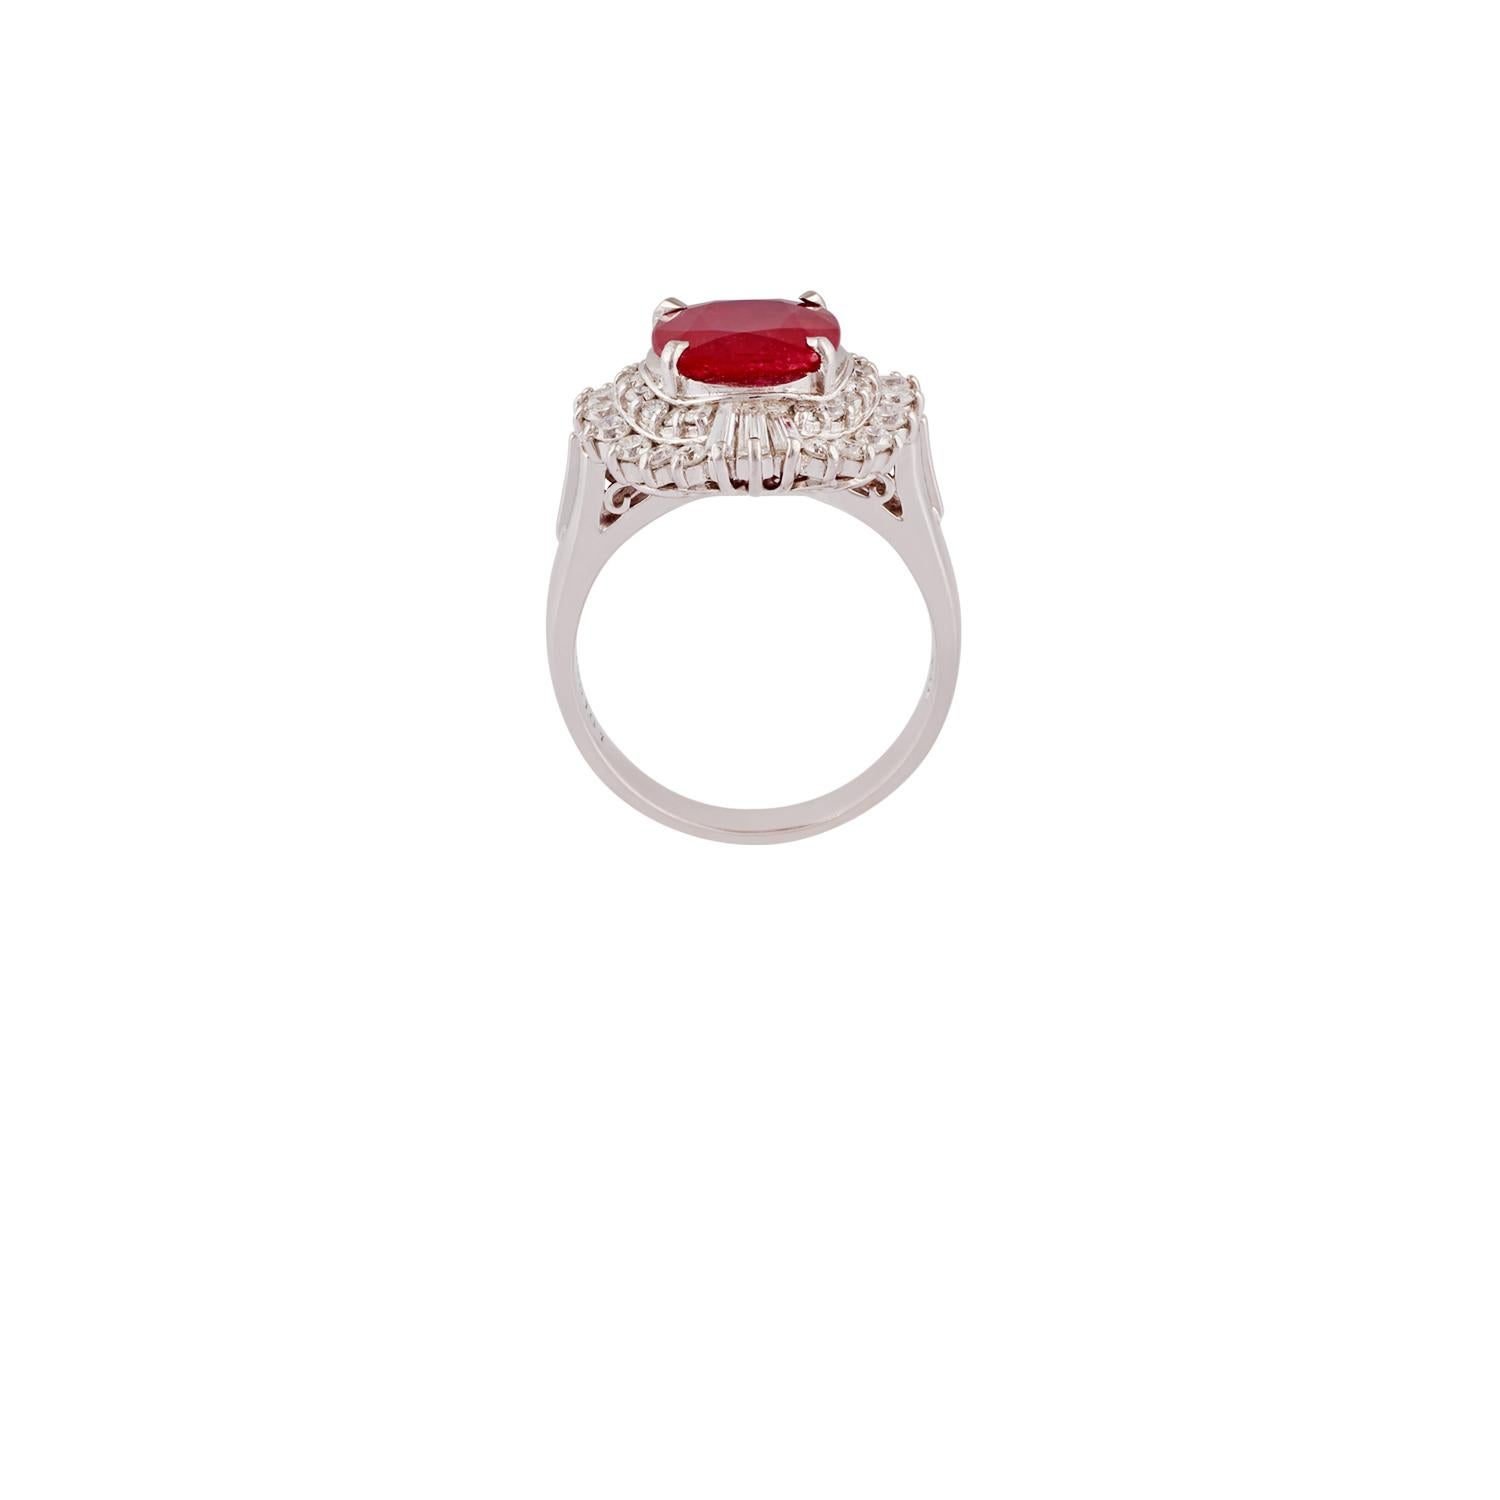 Contemporary 3.06 Carat Ruby & Diamond Ring Studded in 18K White Gold